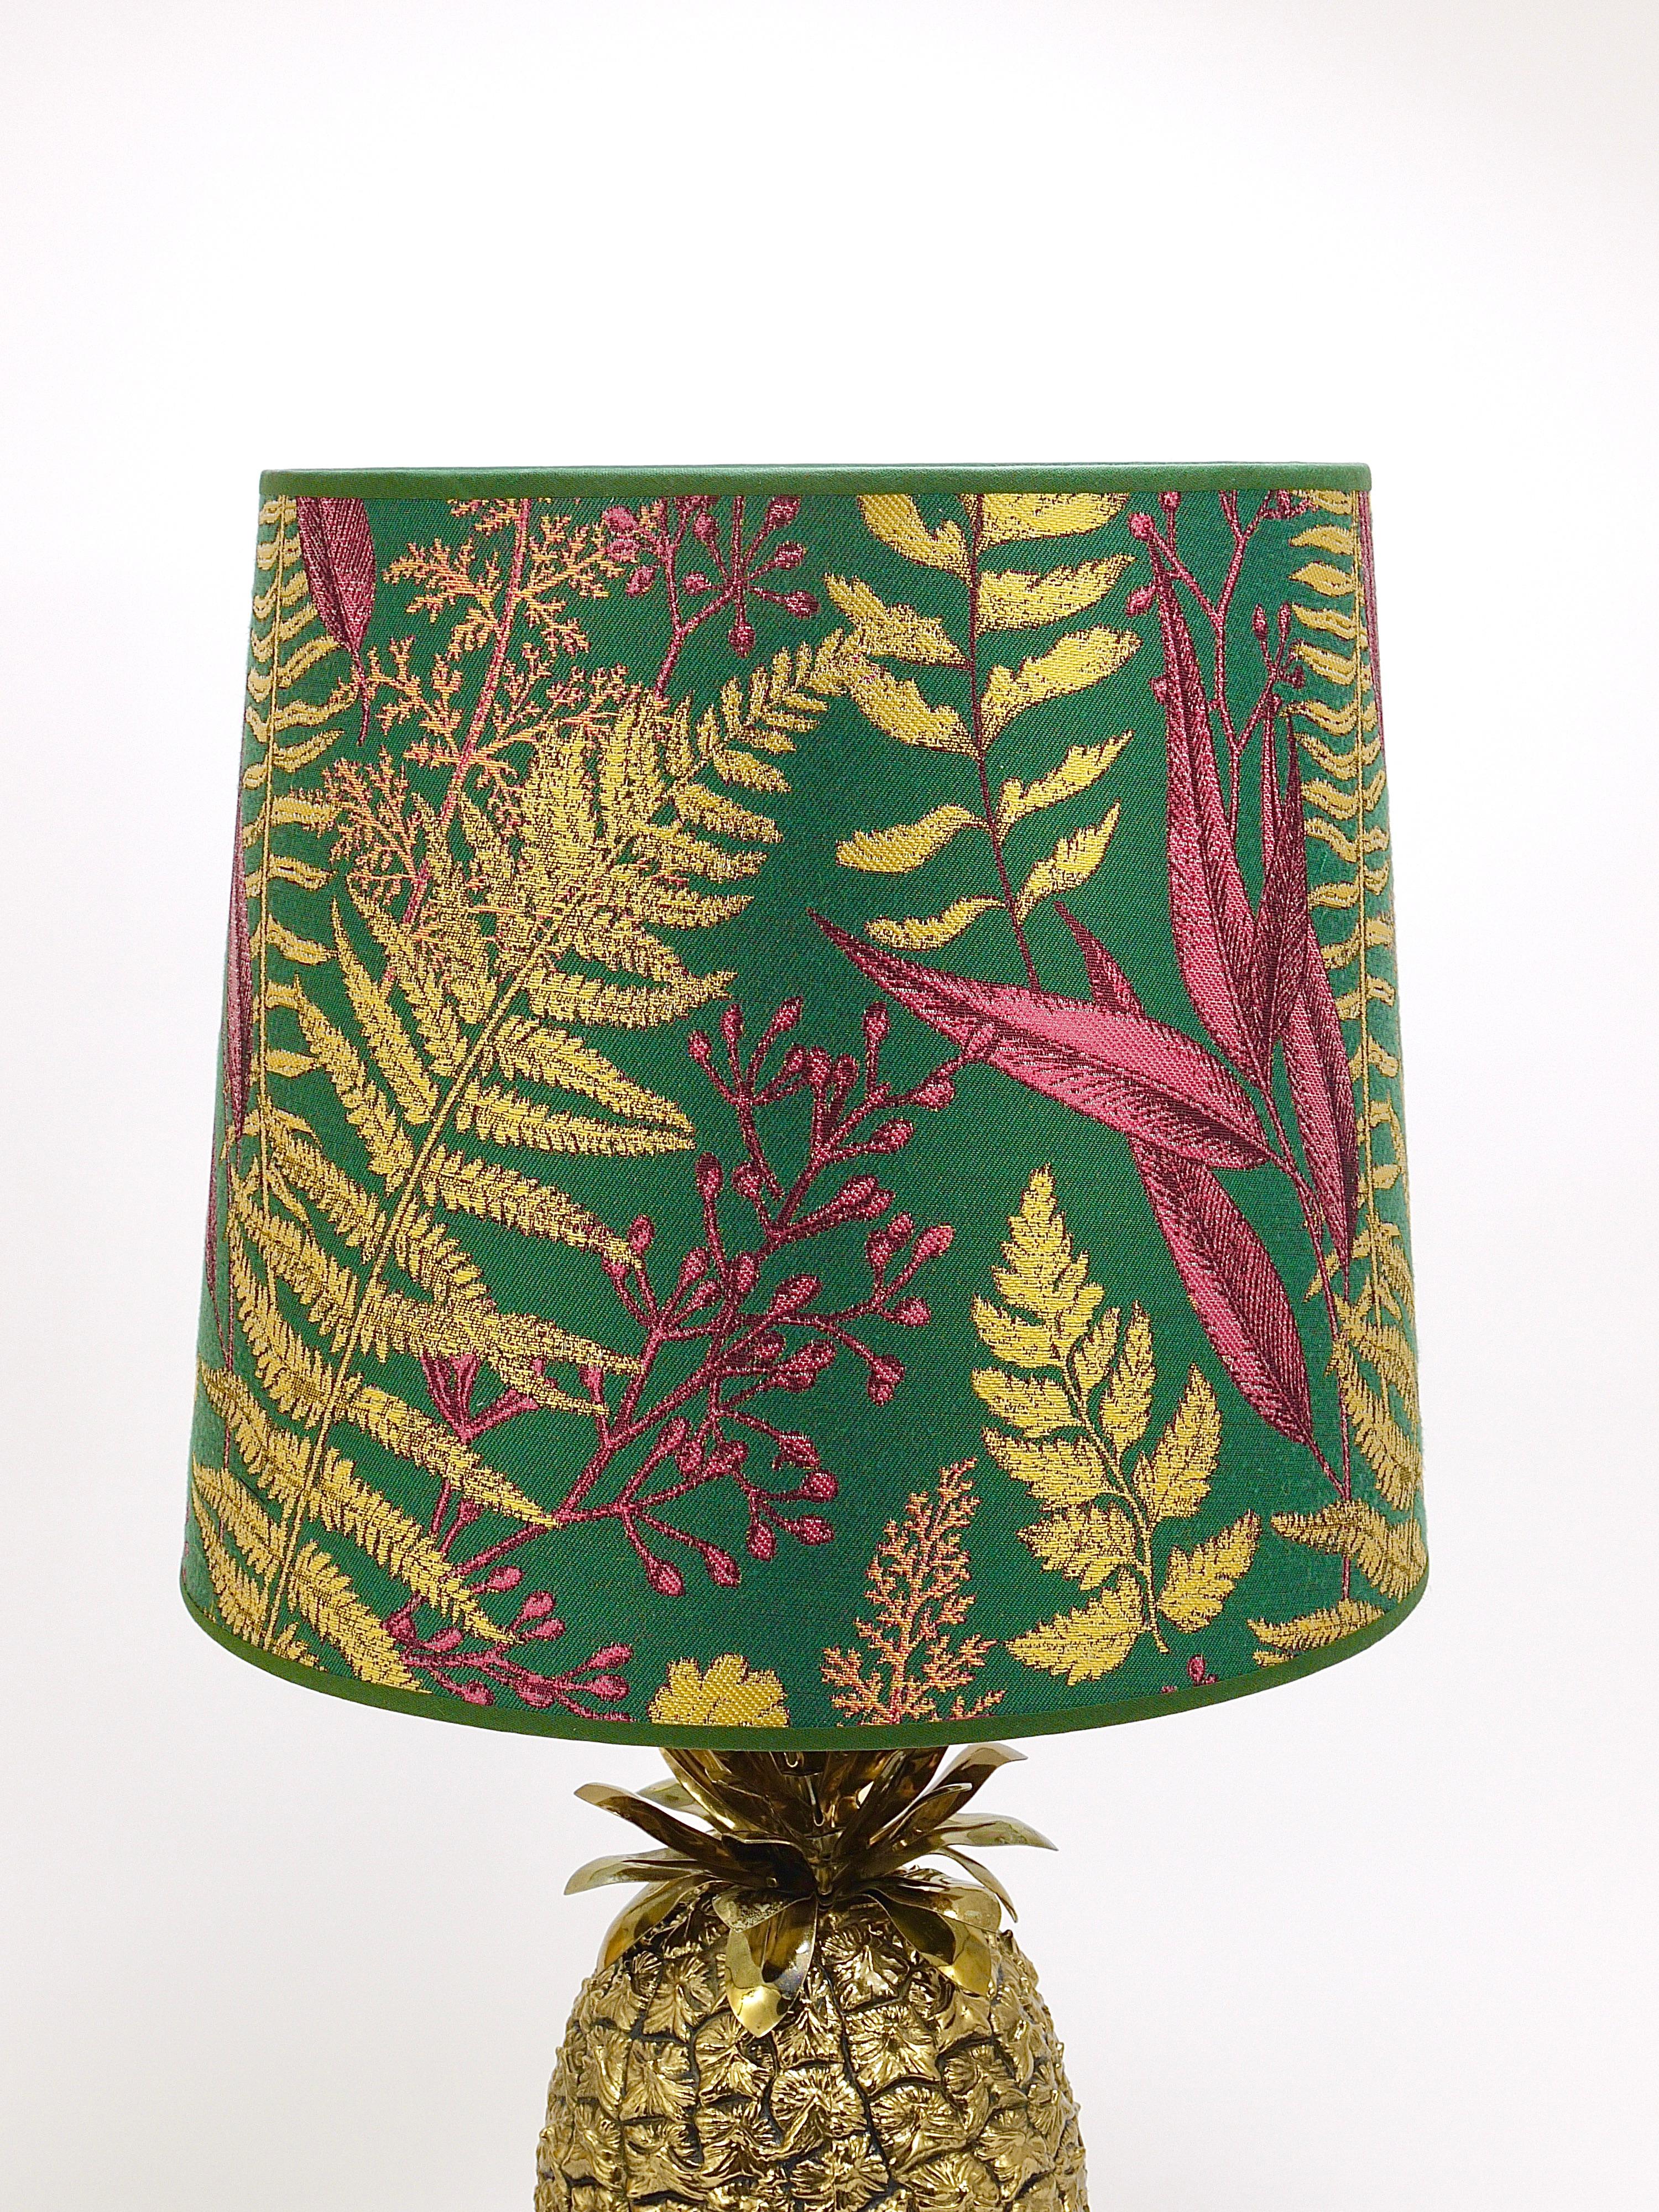 Mauro Manetti Hollywood Regency Pineapple Brass Table Lamp, Italy, 1970s For Sale 8